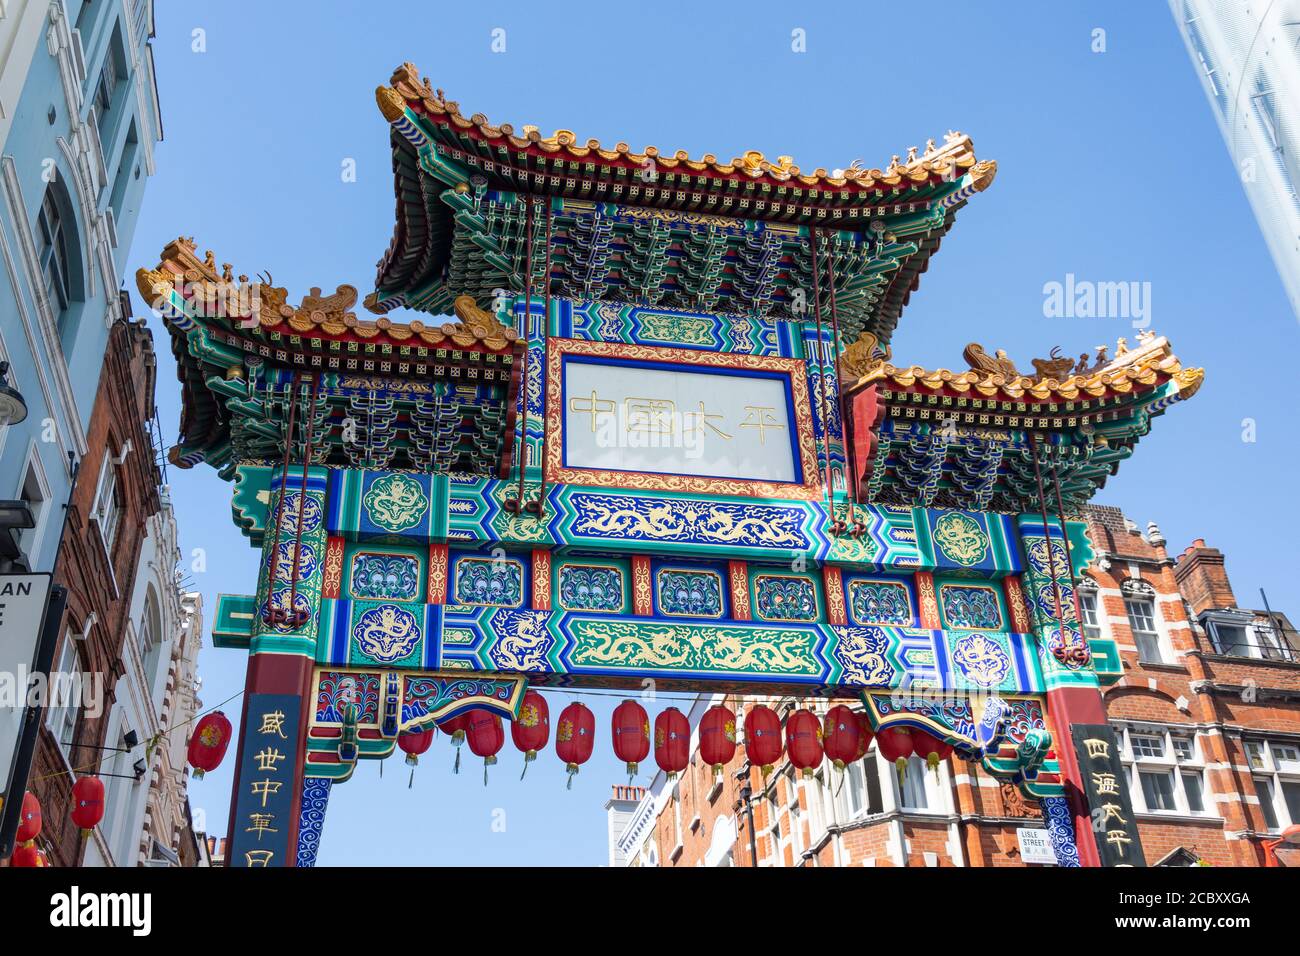 Chinatown Gate, Chinatown, Wardour Street, City of Westminster, Greater London, Angleterre, Royaume-Uni Banque D'Images